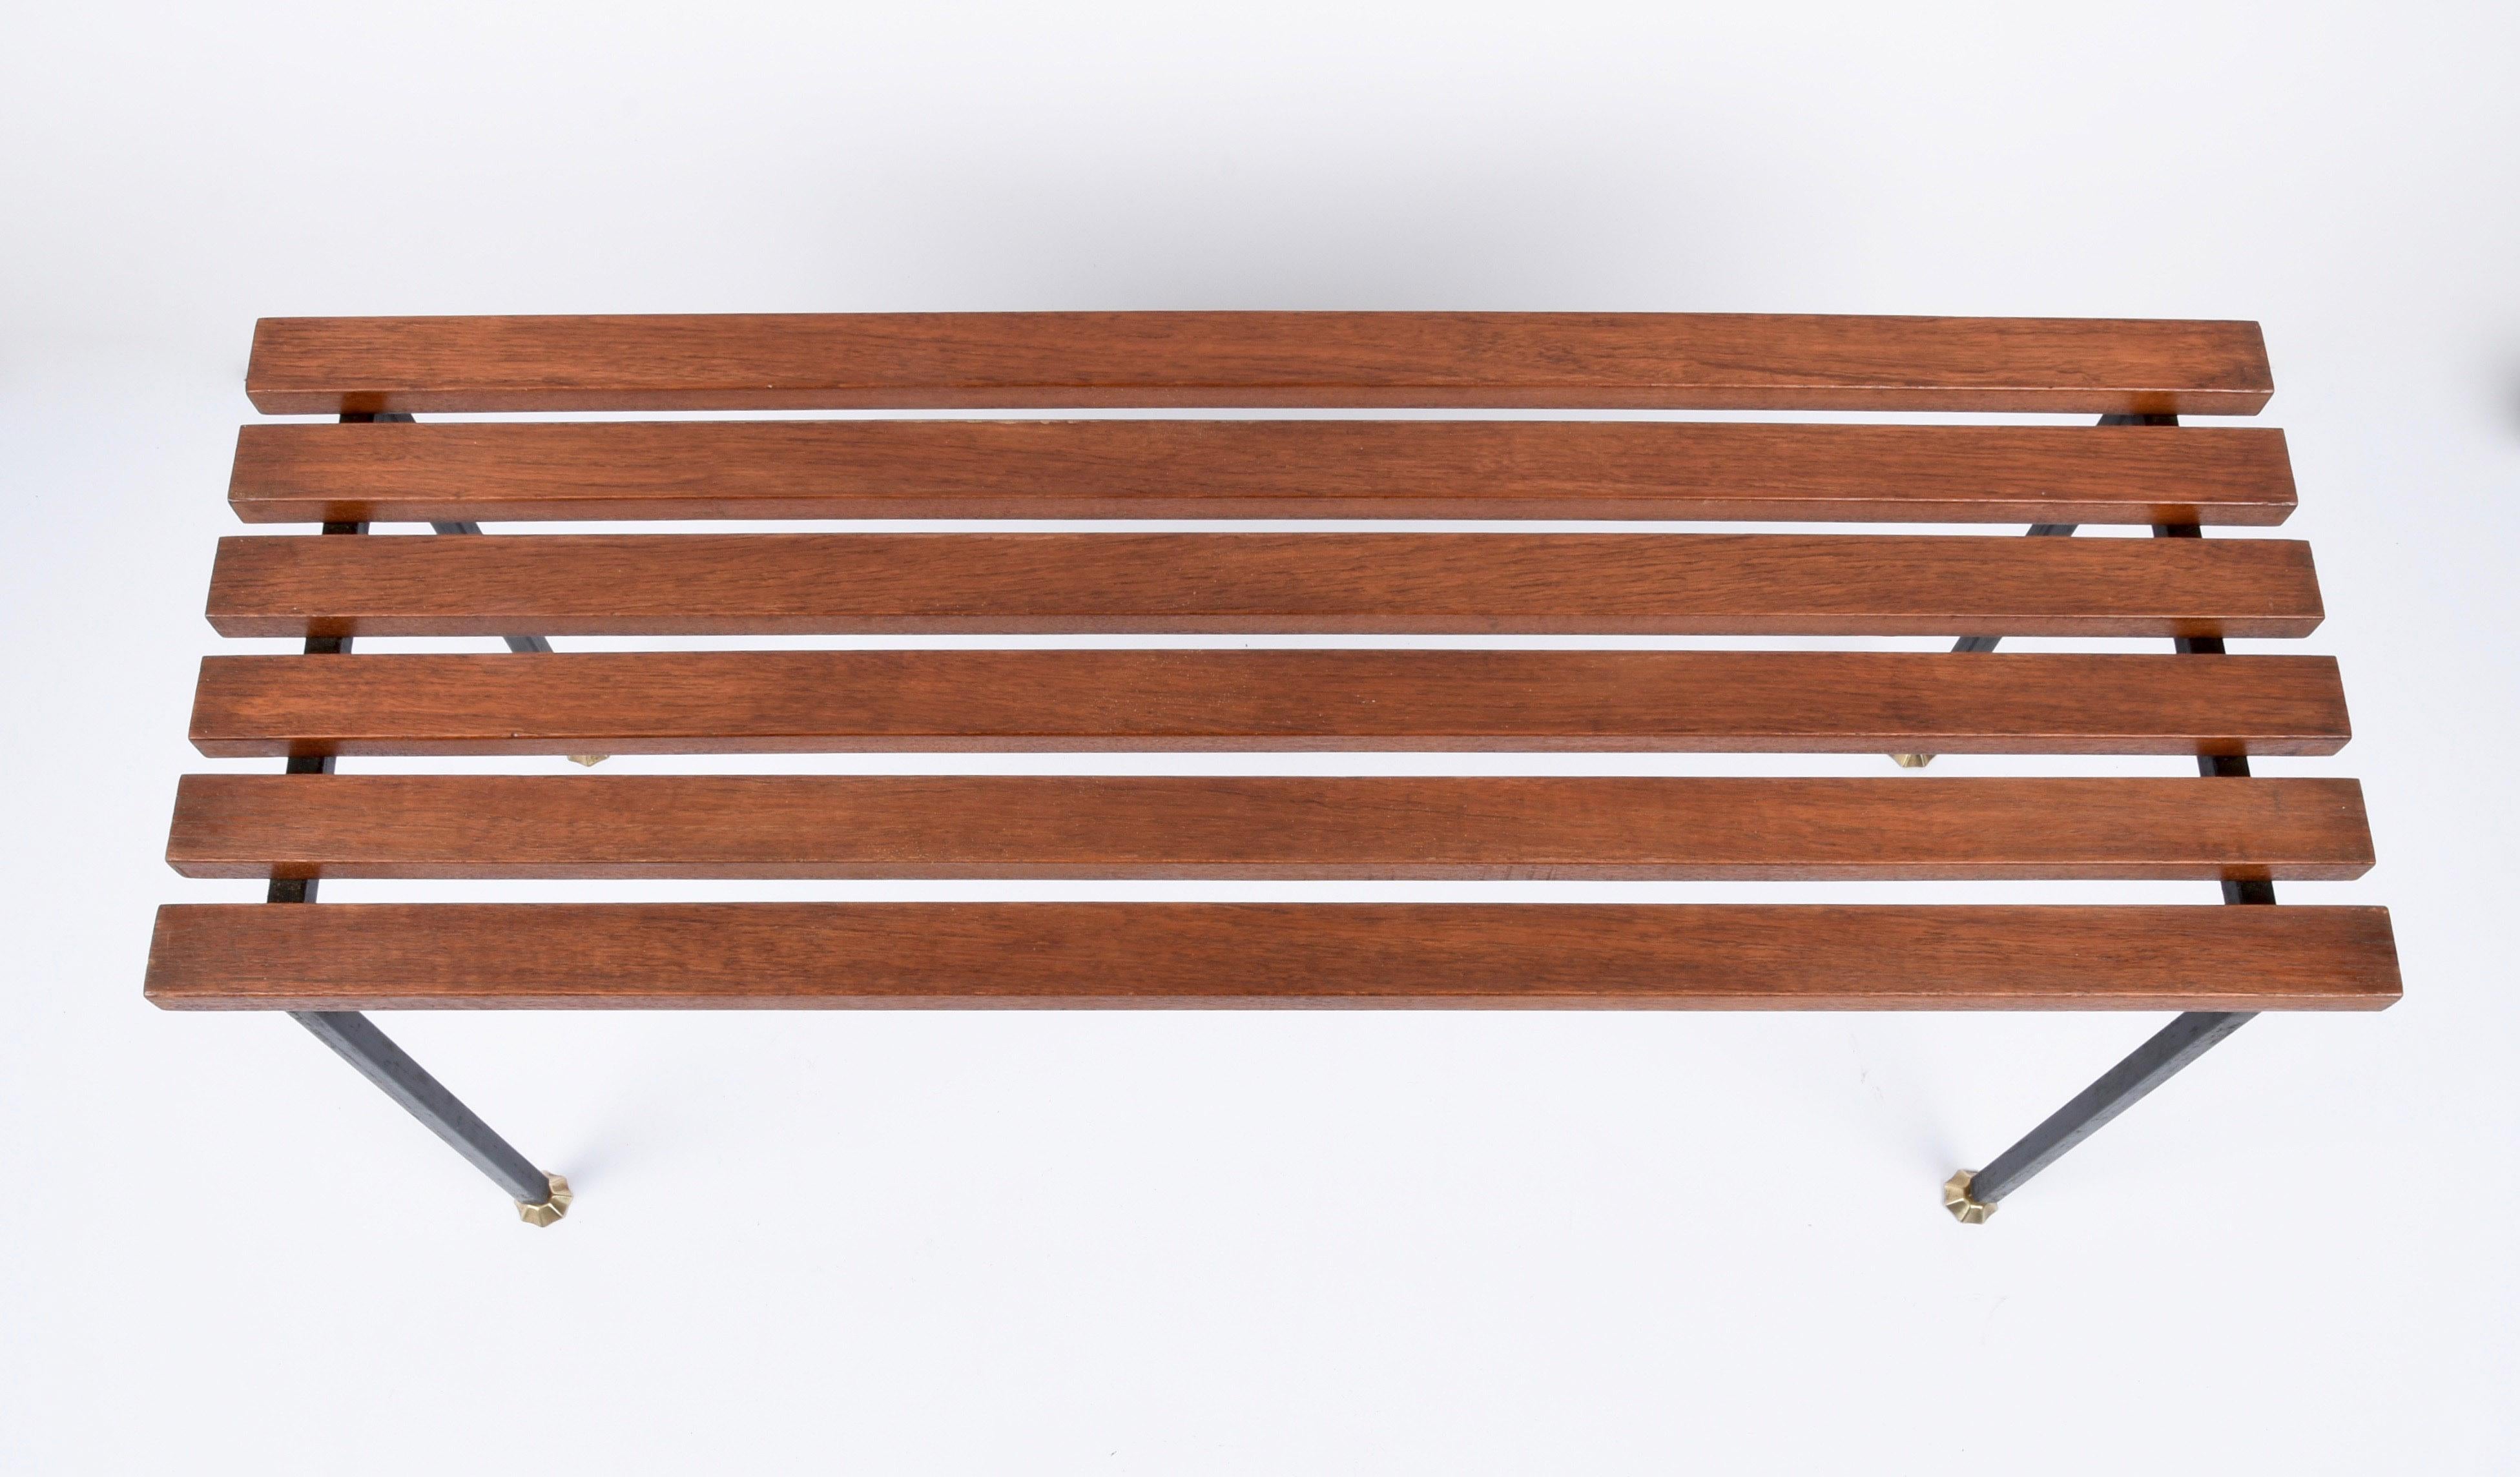 Midcentury Teak and Black Enameled Metal Italian Bench with Brass Feet, 1960s For Sale 8